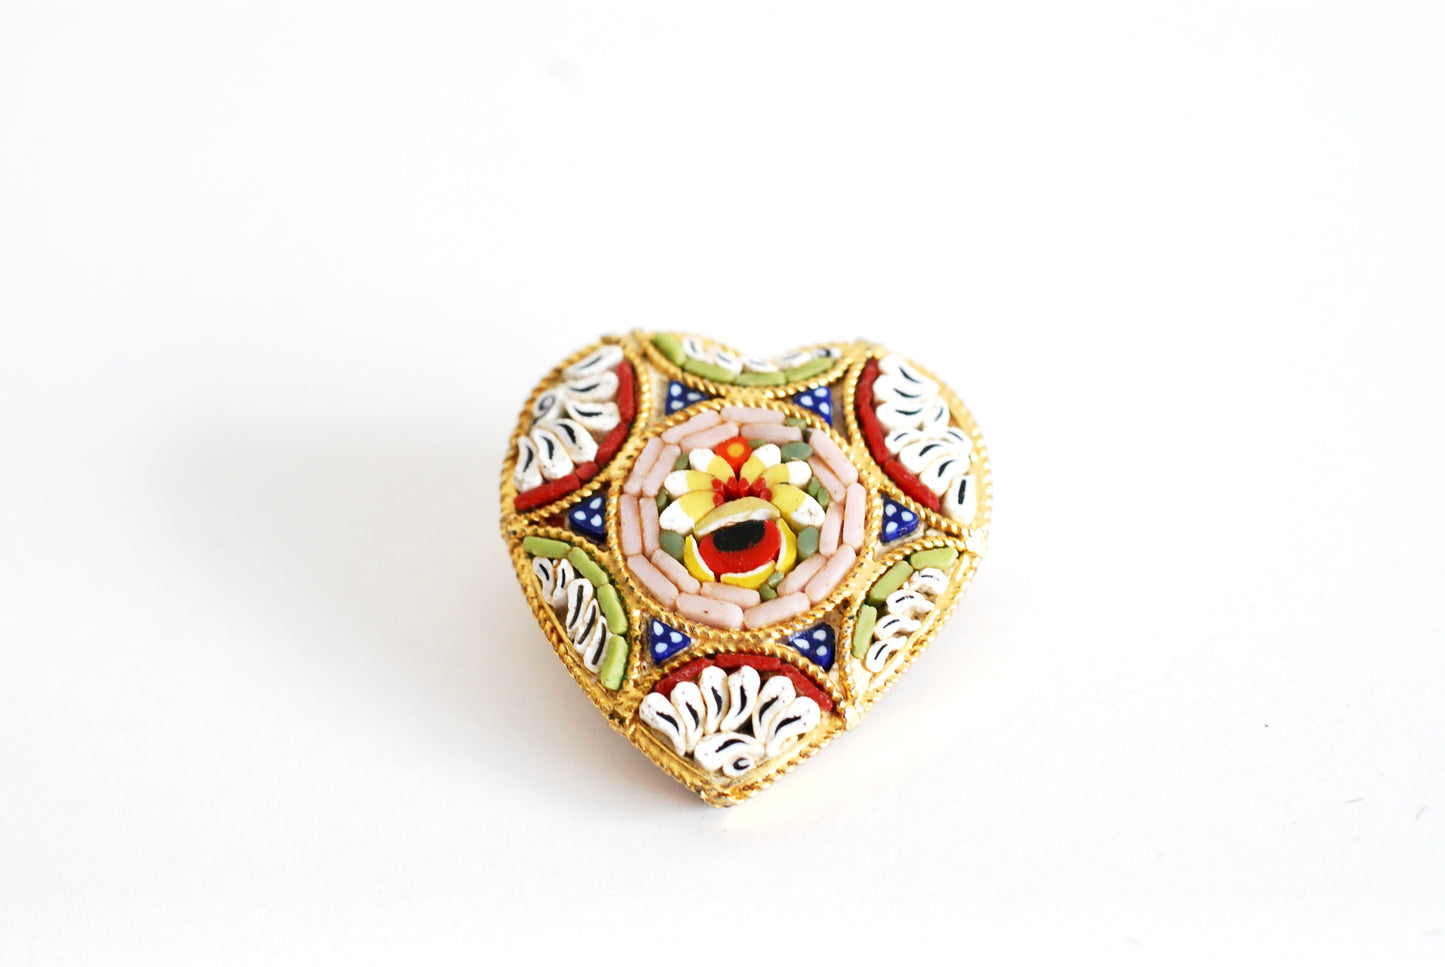 Micro Mosaic Heart Brooch Stamped Italy